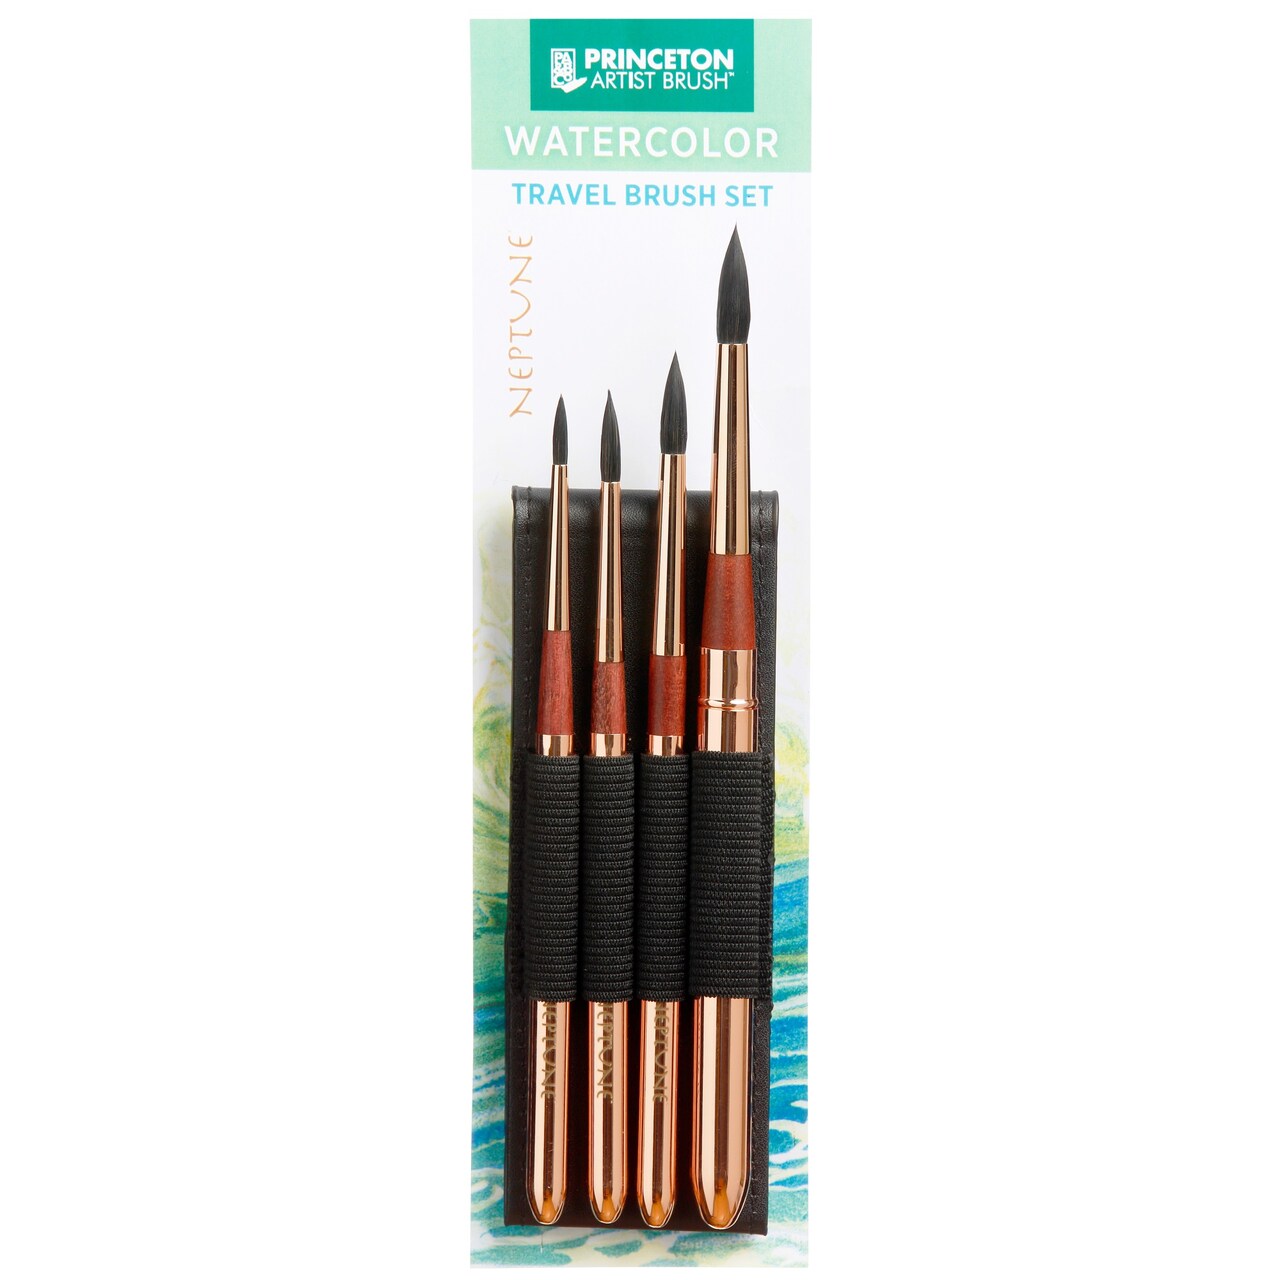 Princeton Artist Brush, Neptune Series 4750, Synthetic Squirrel Watercolor  Paint Brush, 4 Piece Professional Travel Set, Size Round 4, 6, 8, 10